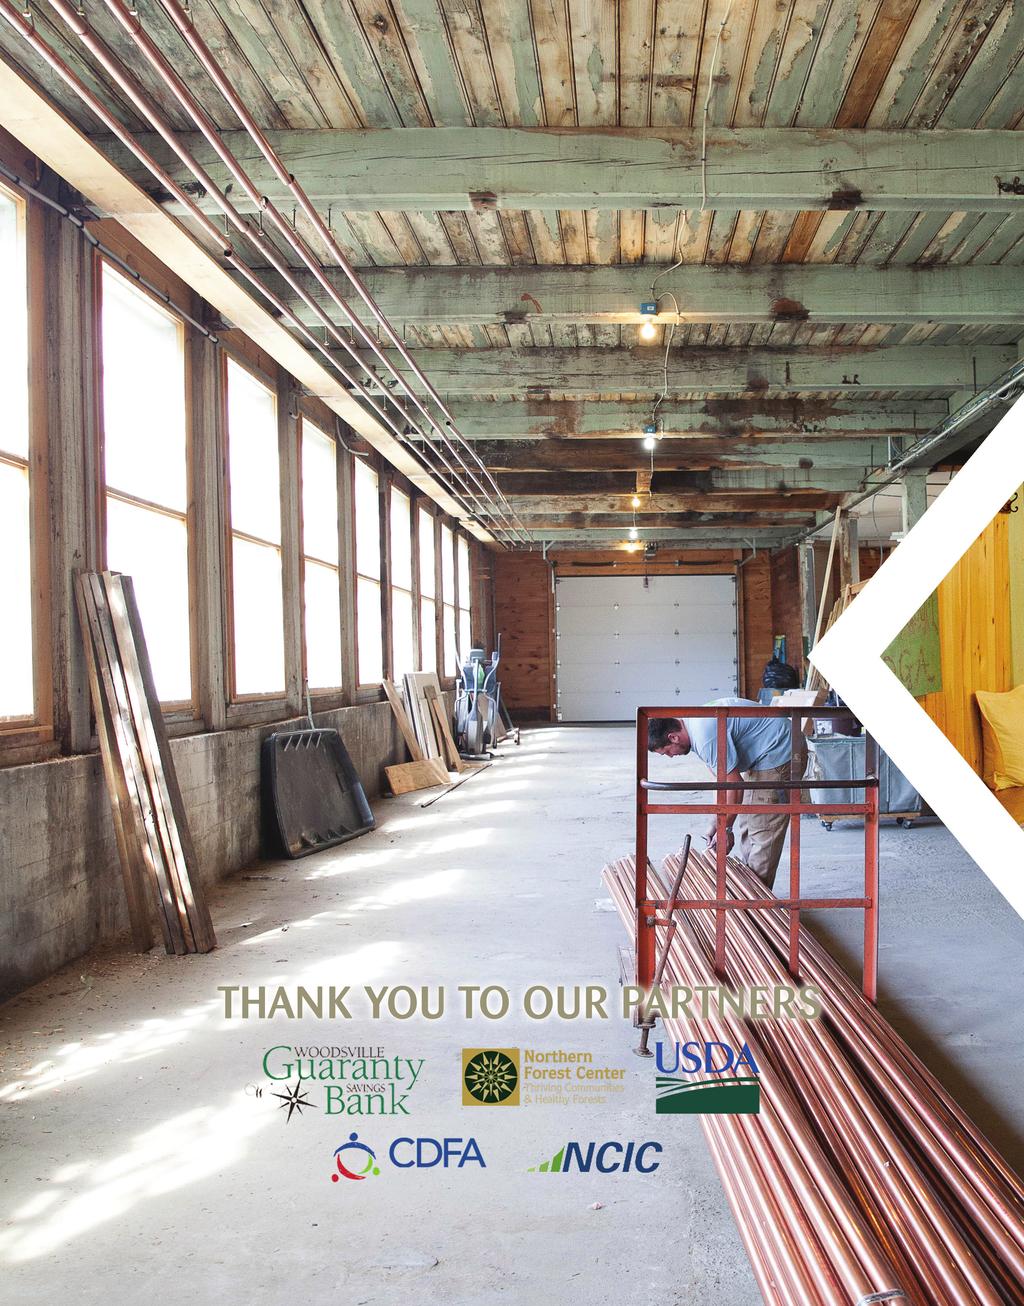 111 SARANAC STREET LITTLETON, NH. 03561 Development in a historic neighborhood involves many partners and supporters. Our thanks go out to them and the many others who have helped us over the years.